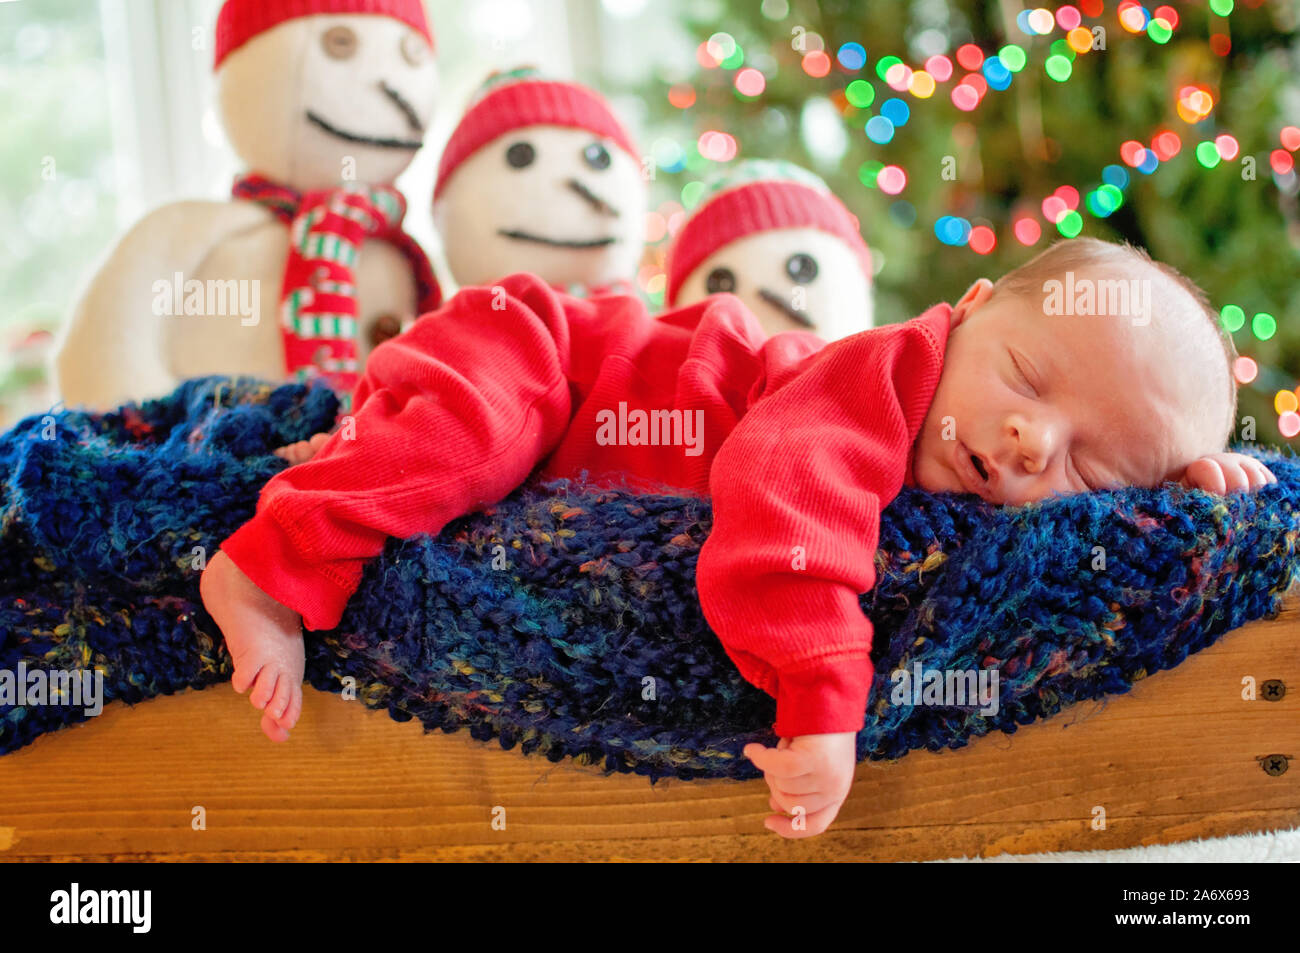 newborn baby laying in wooden manger on top of a blue knitted afghan Stock Photo